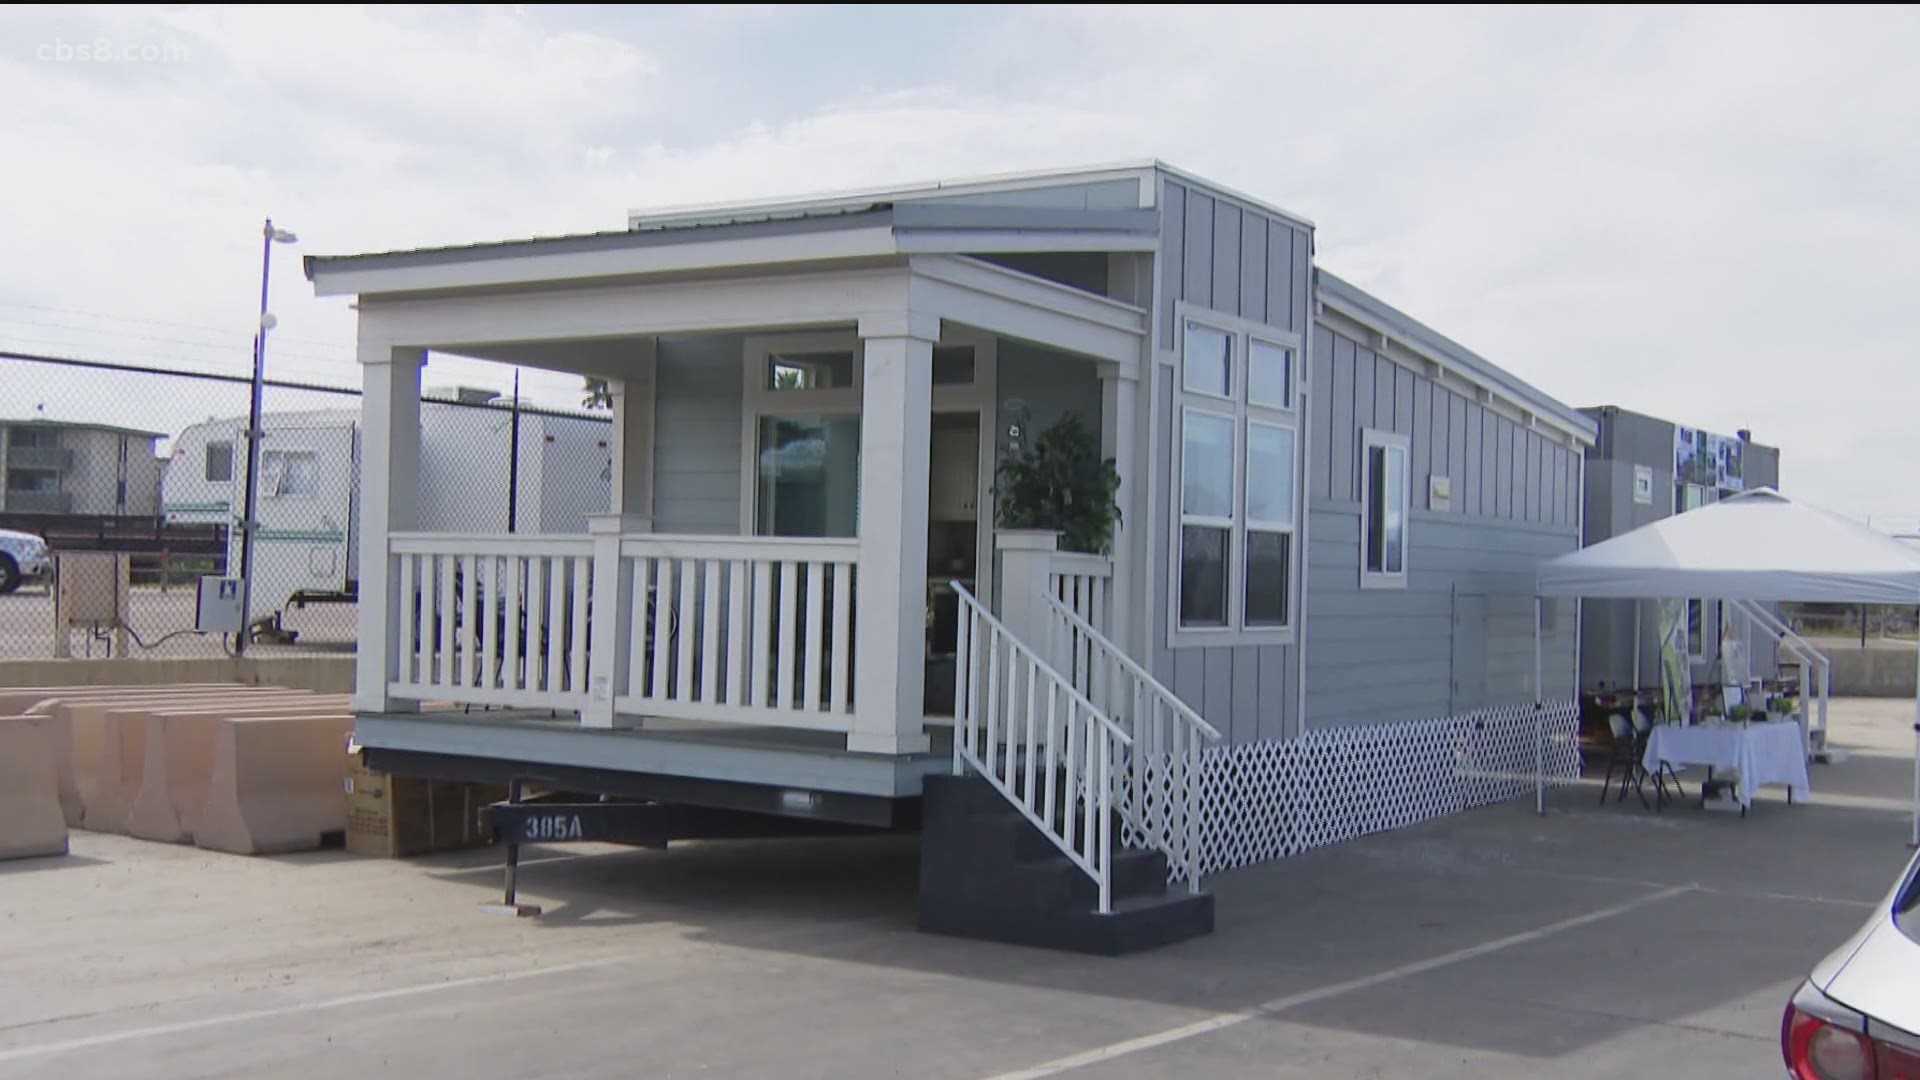 Under the new plan "tiny homes" cannot be used as short term vacation rentals.